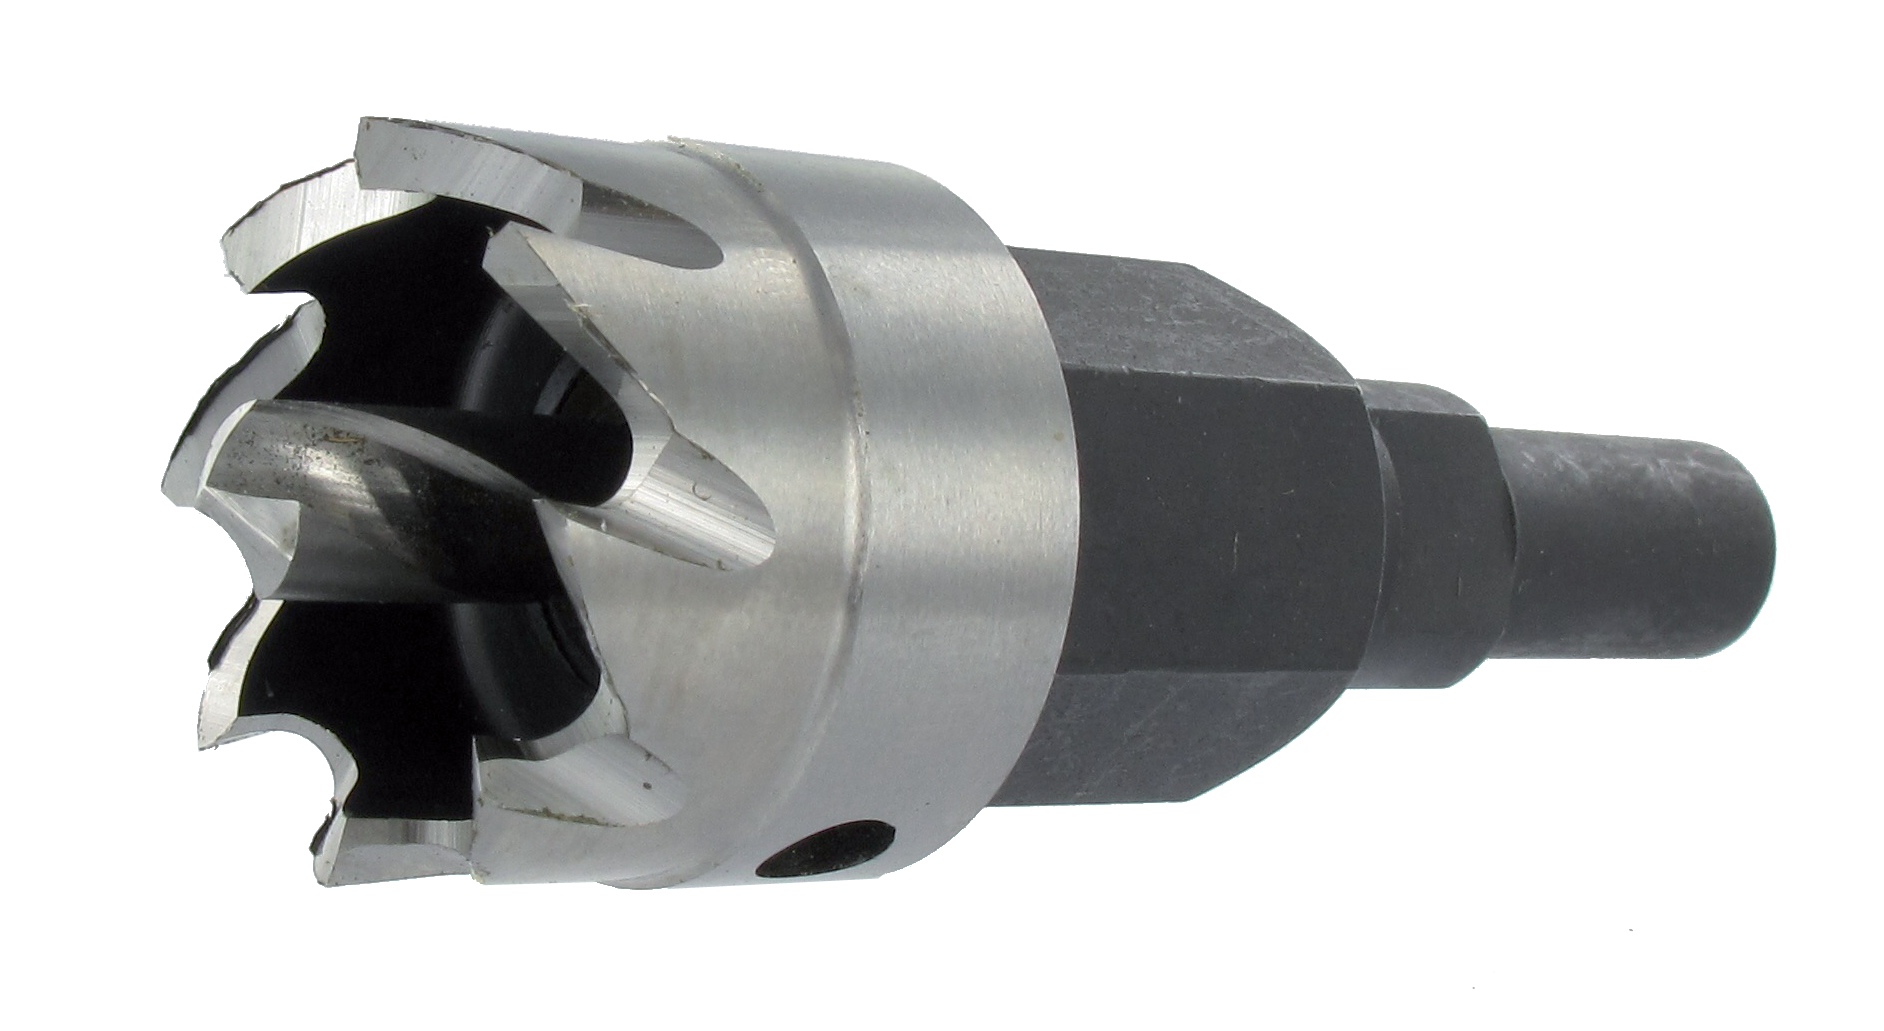 Milling cutters for saddle clamp connector for compressed air piping system